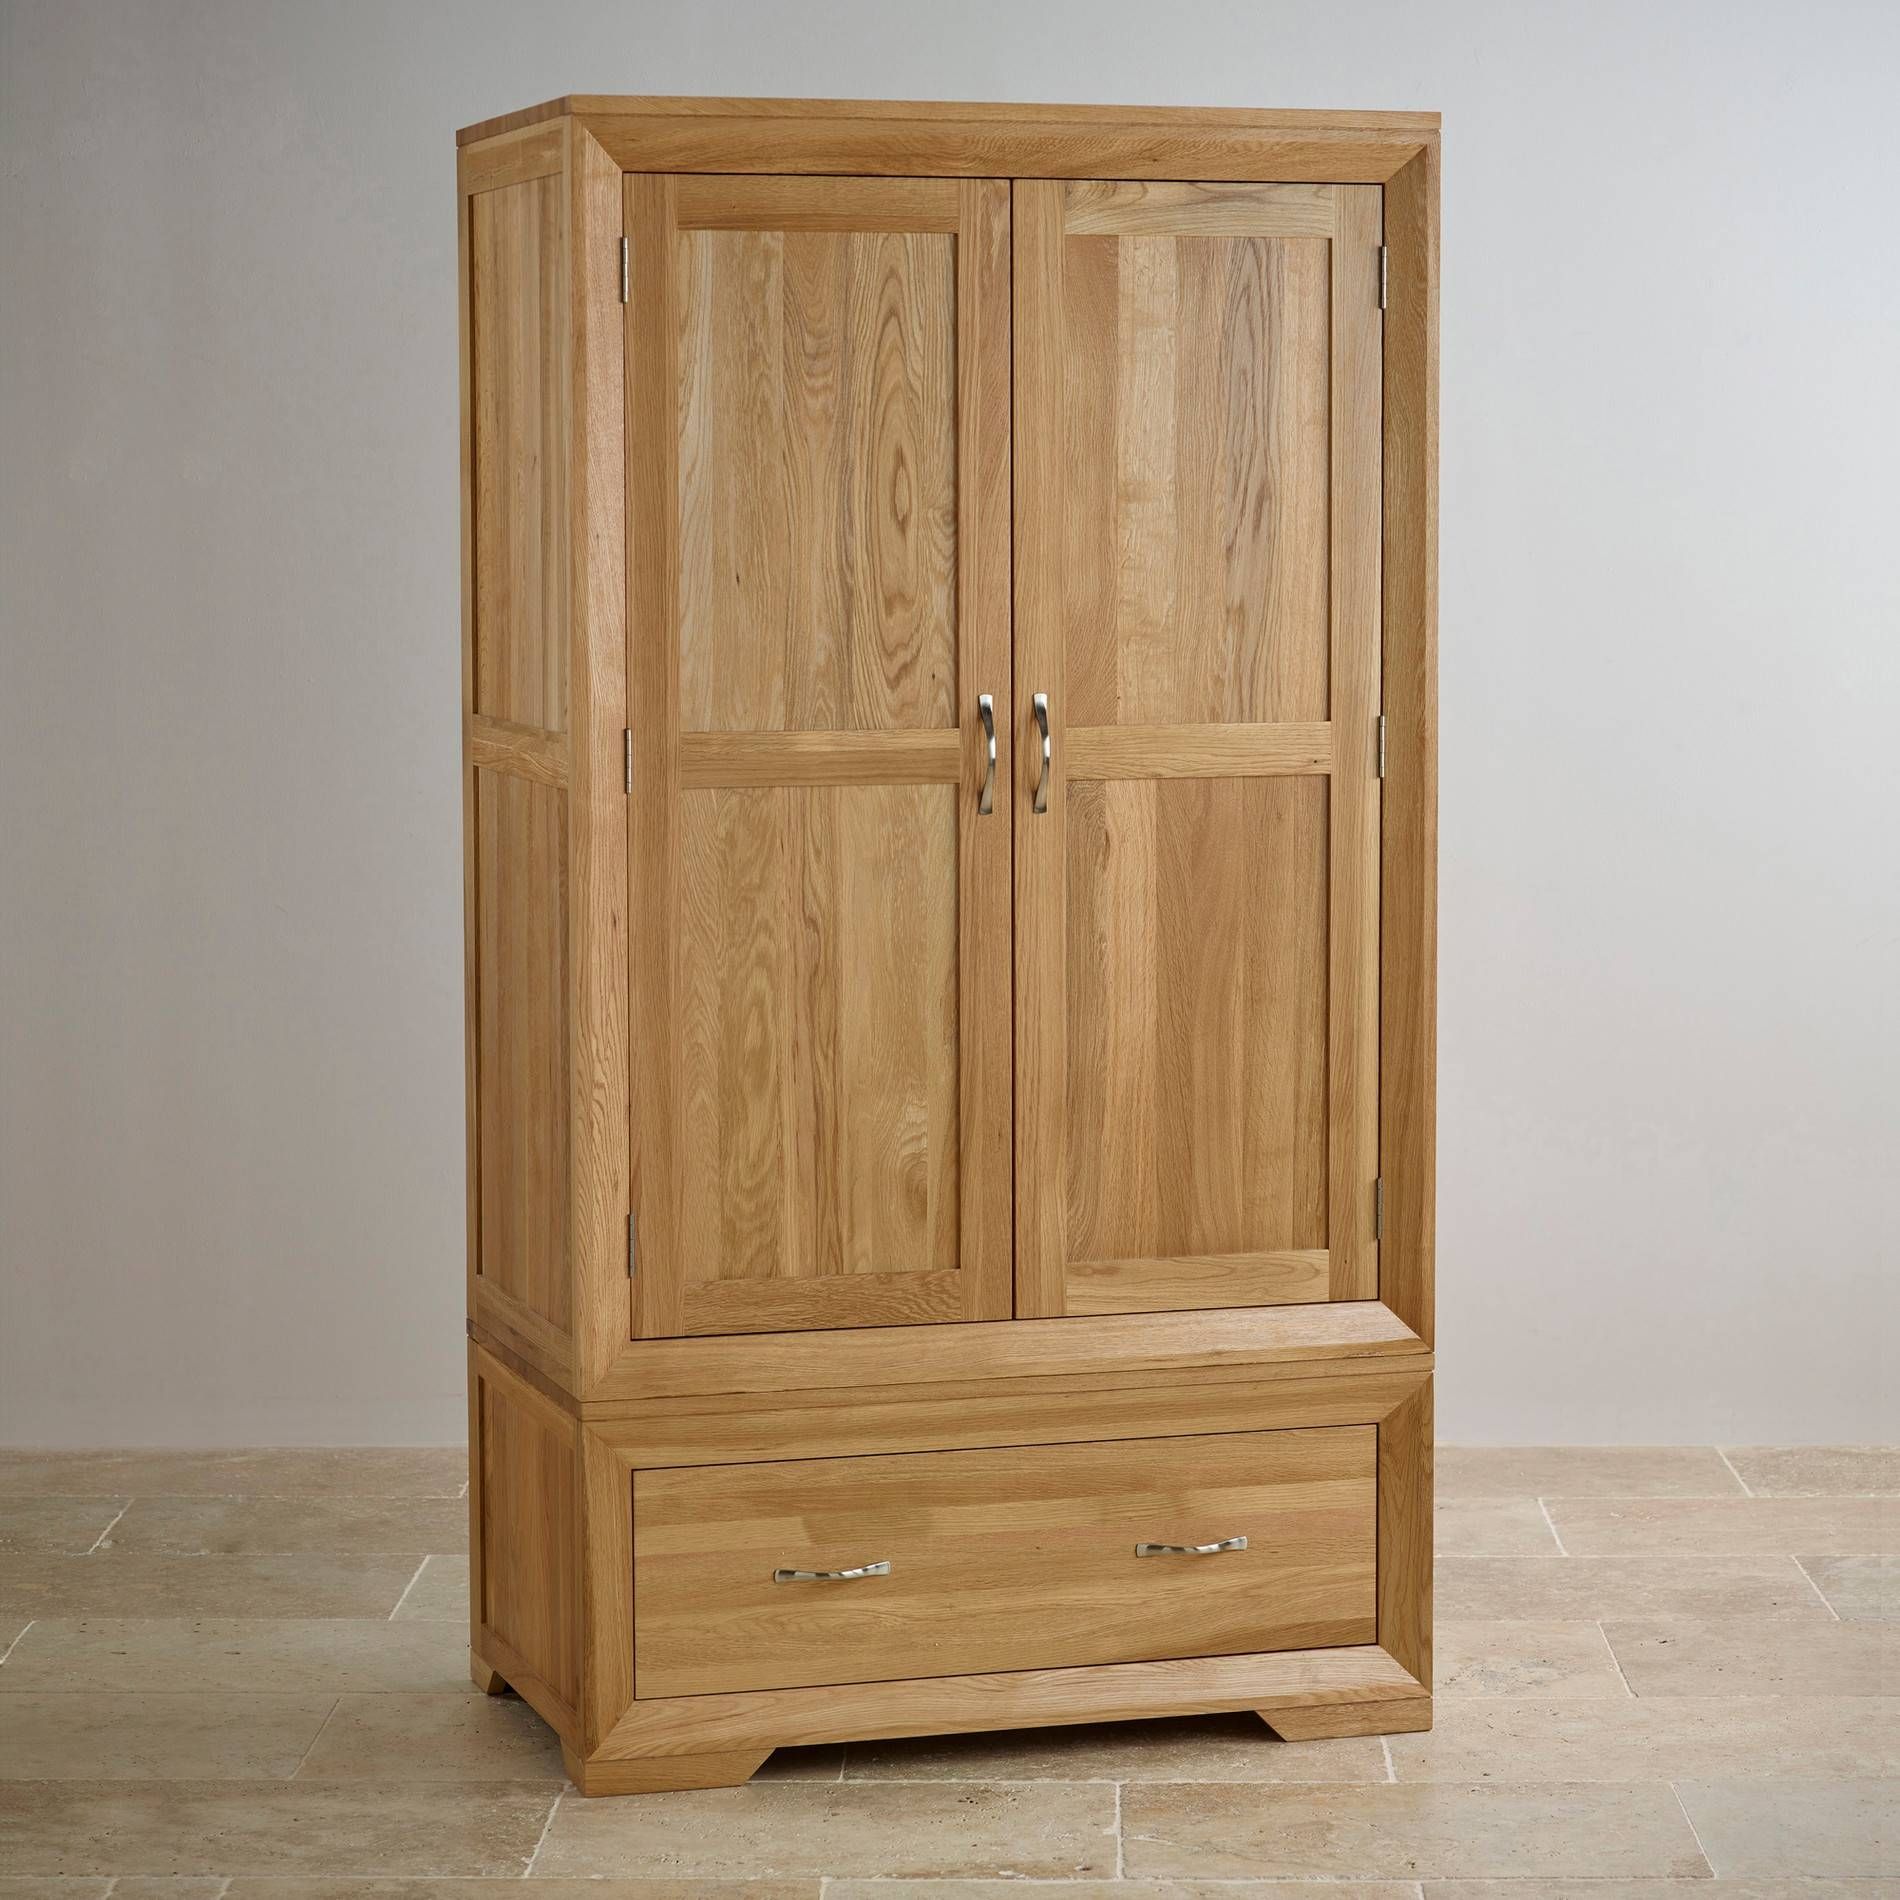 Solid Hardwood Wardrobes | Finance Available | Oak Furniture Land For Small Wardrobes (View 8 of 15)